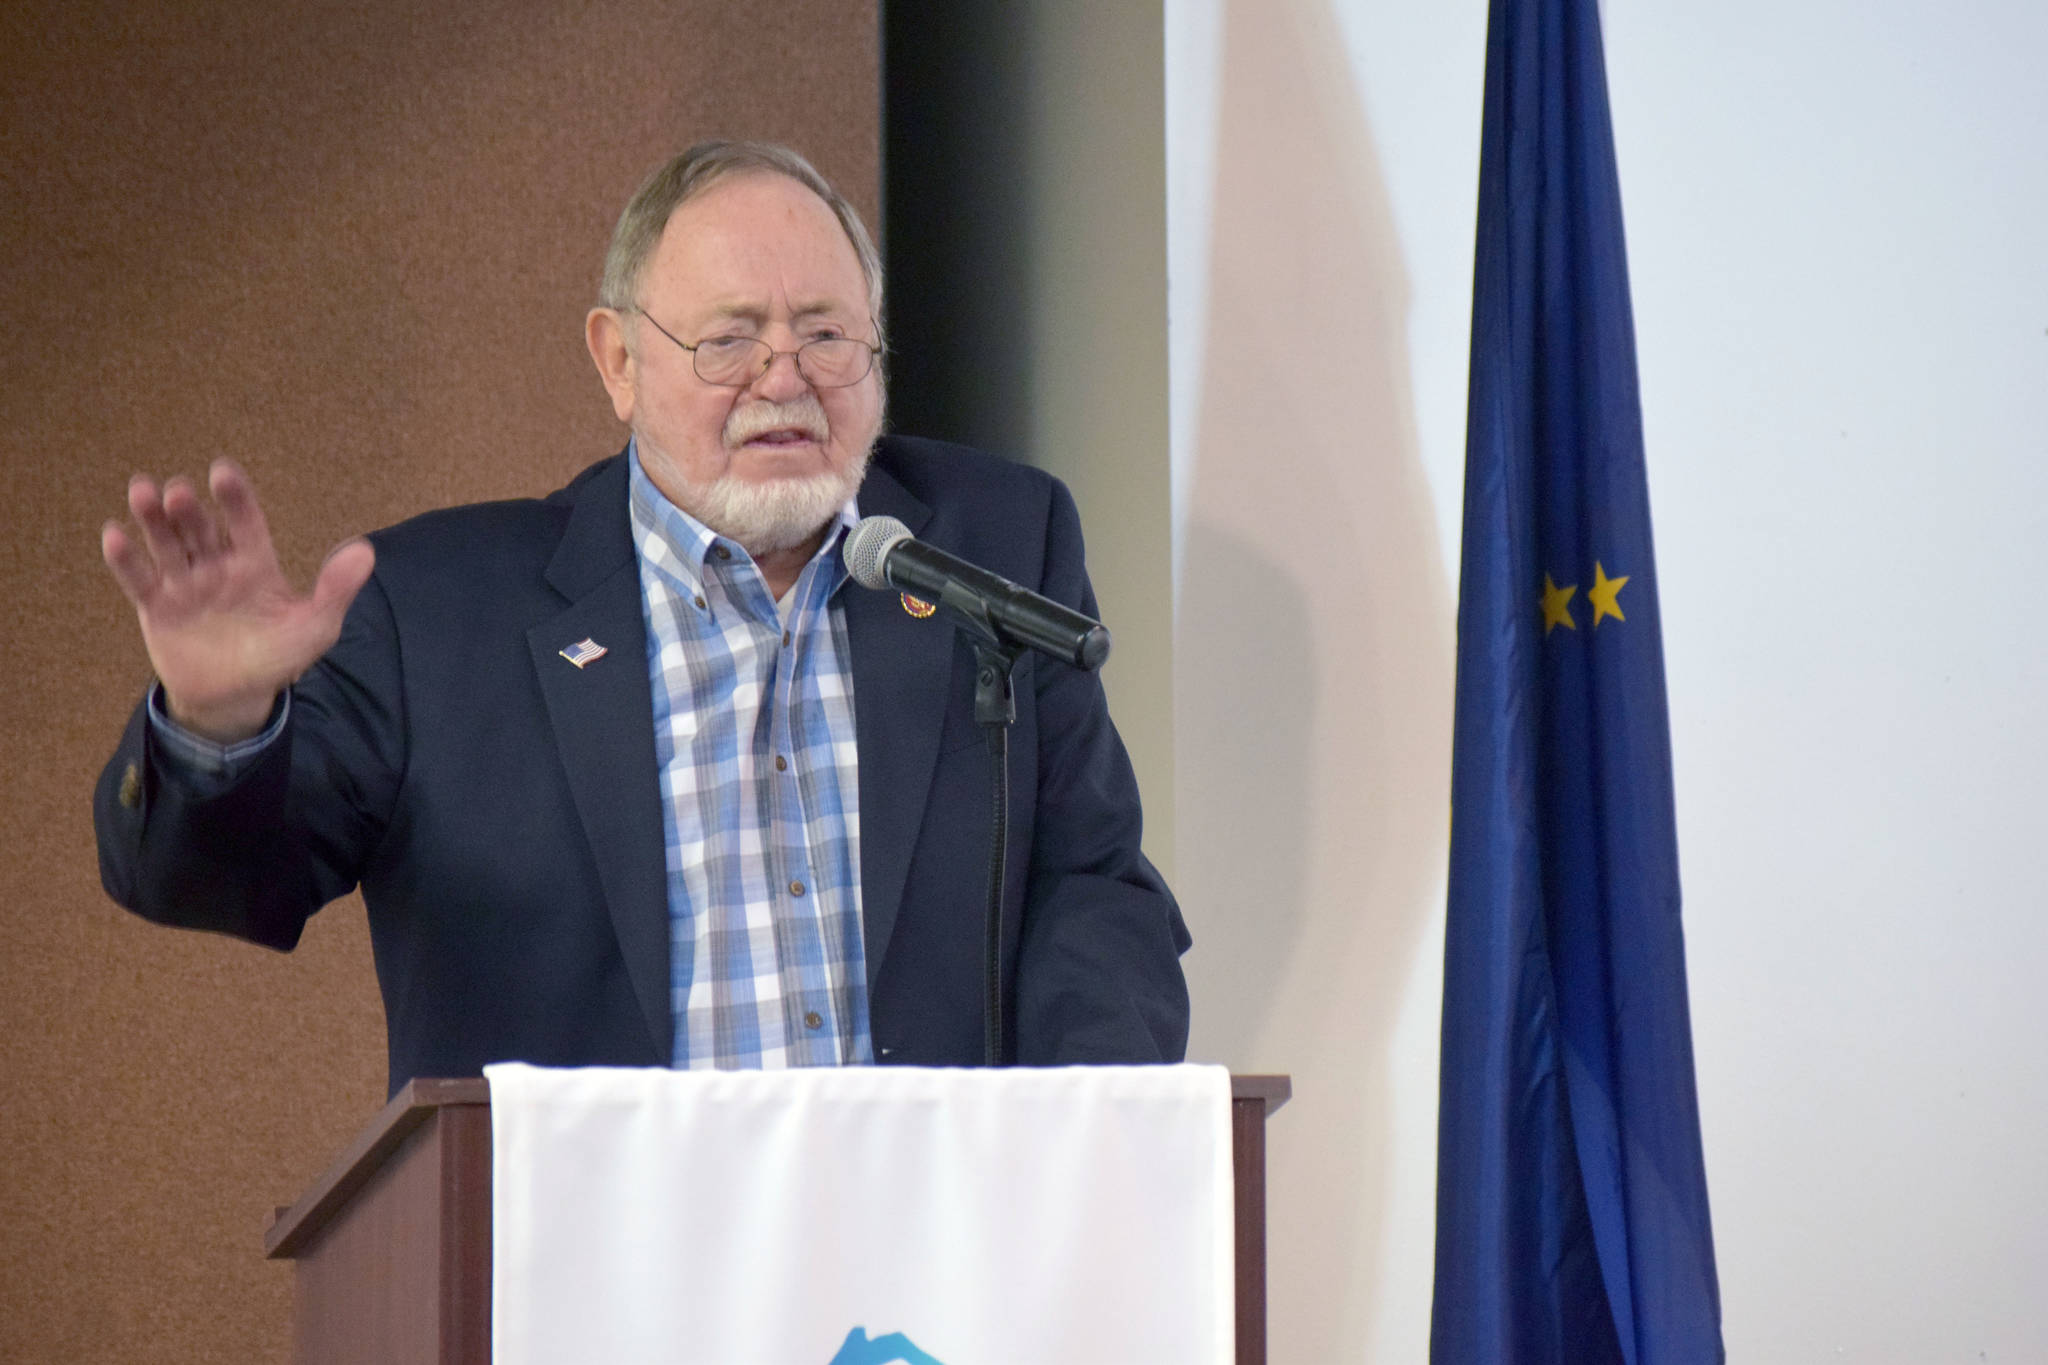 Rep. Don Young, R-Alaska, gives a presentation to the Kenai and Soldotna Chambers of Commerce during a luncheon at the Kenai Visitor’s Center in Kenai, Alaska on Tuesday, April 23, 2019. (Photo by Brian Mazurek/Peninsula Clarion)